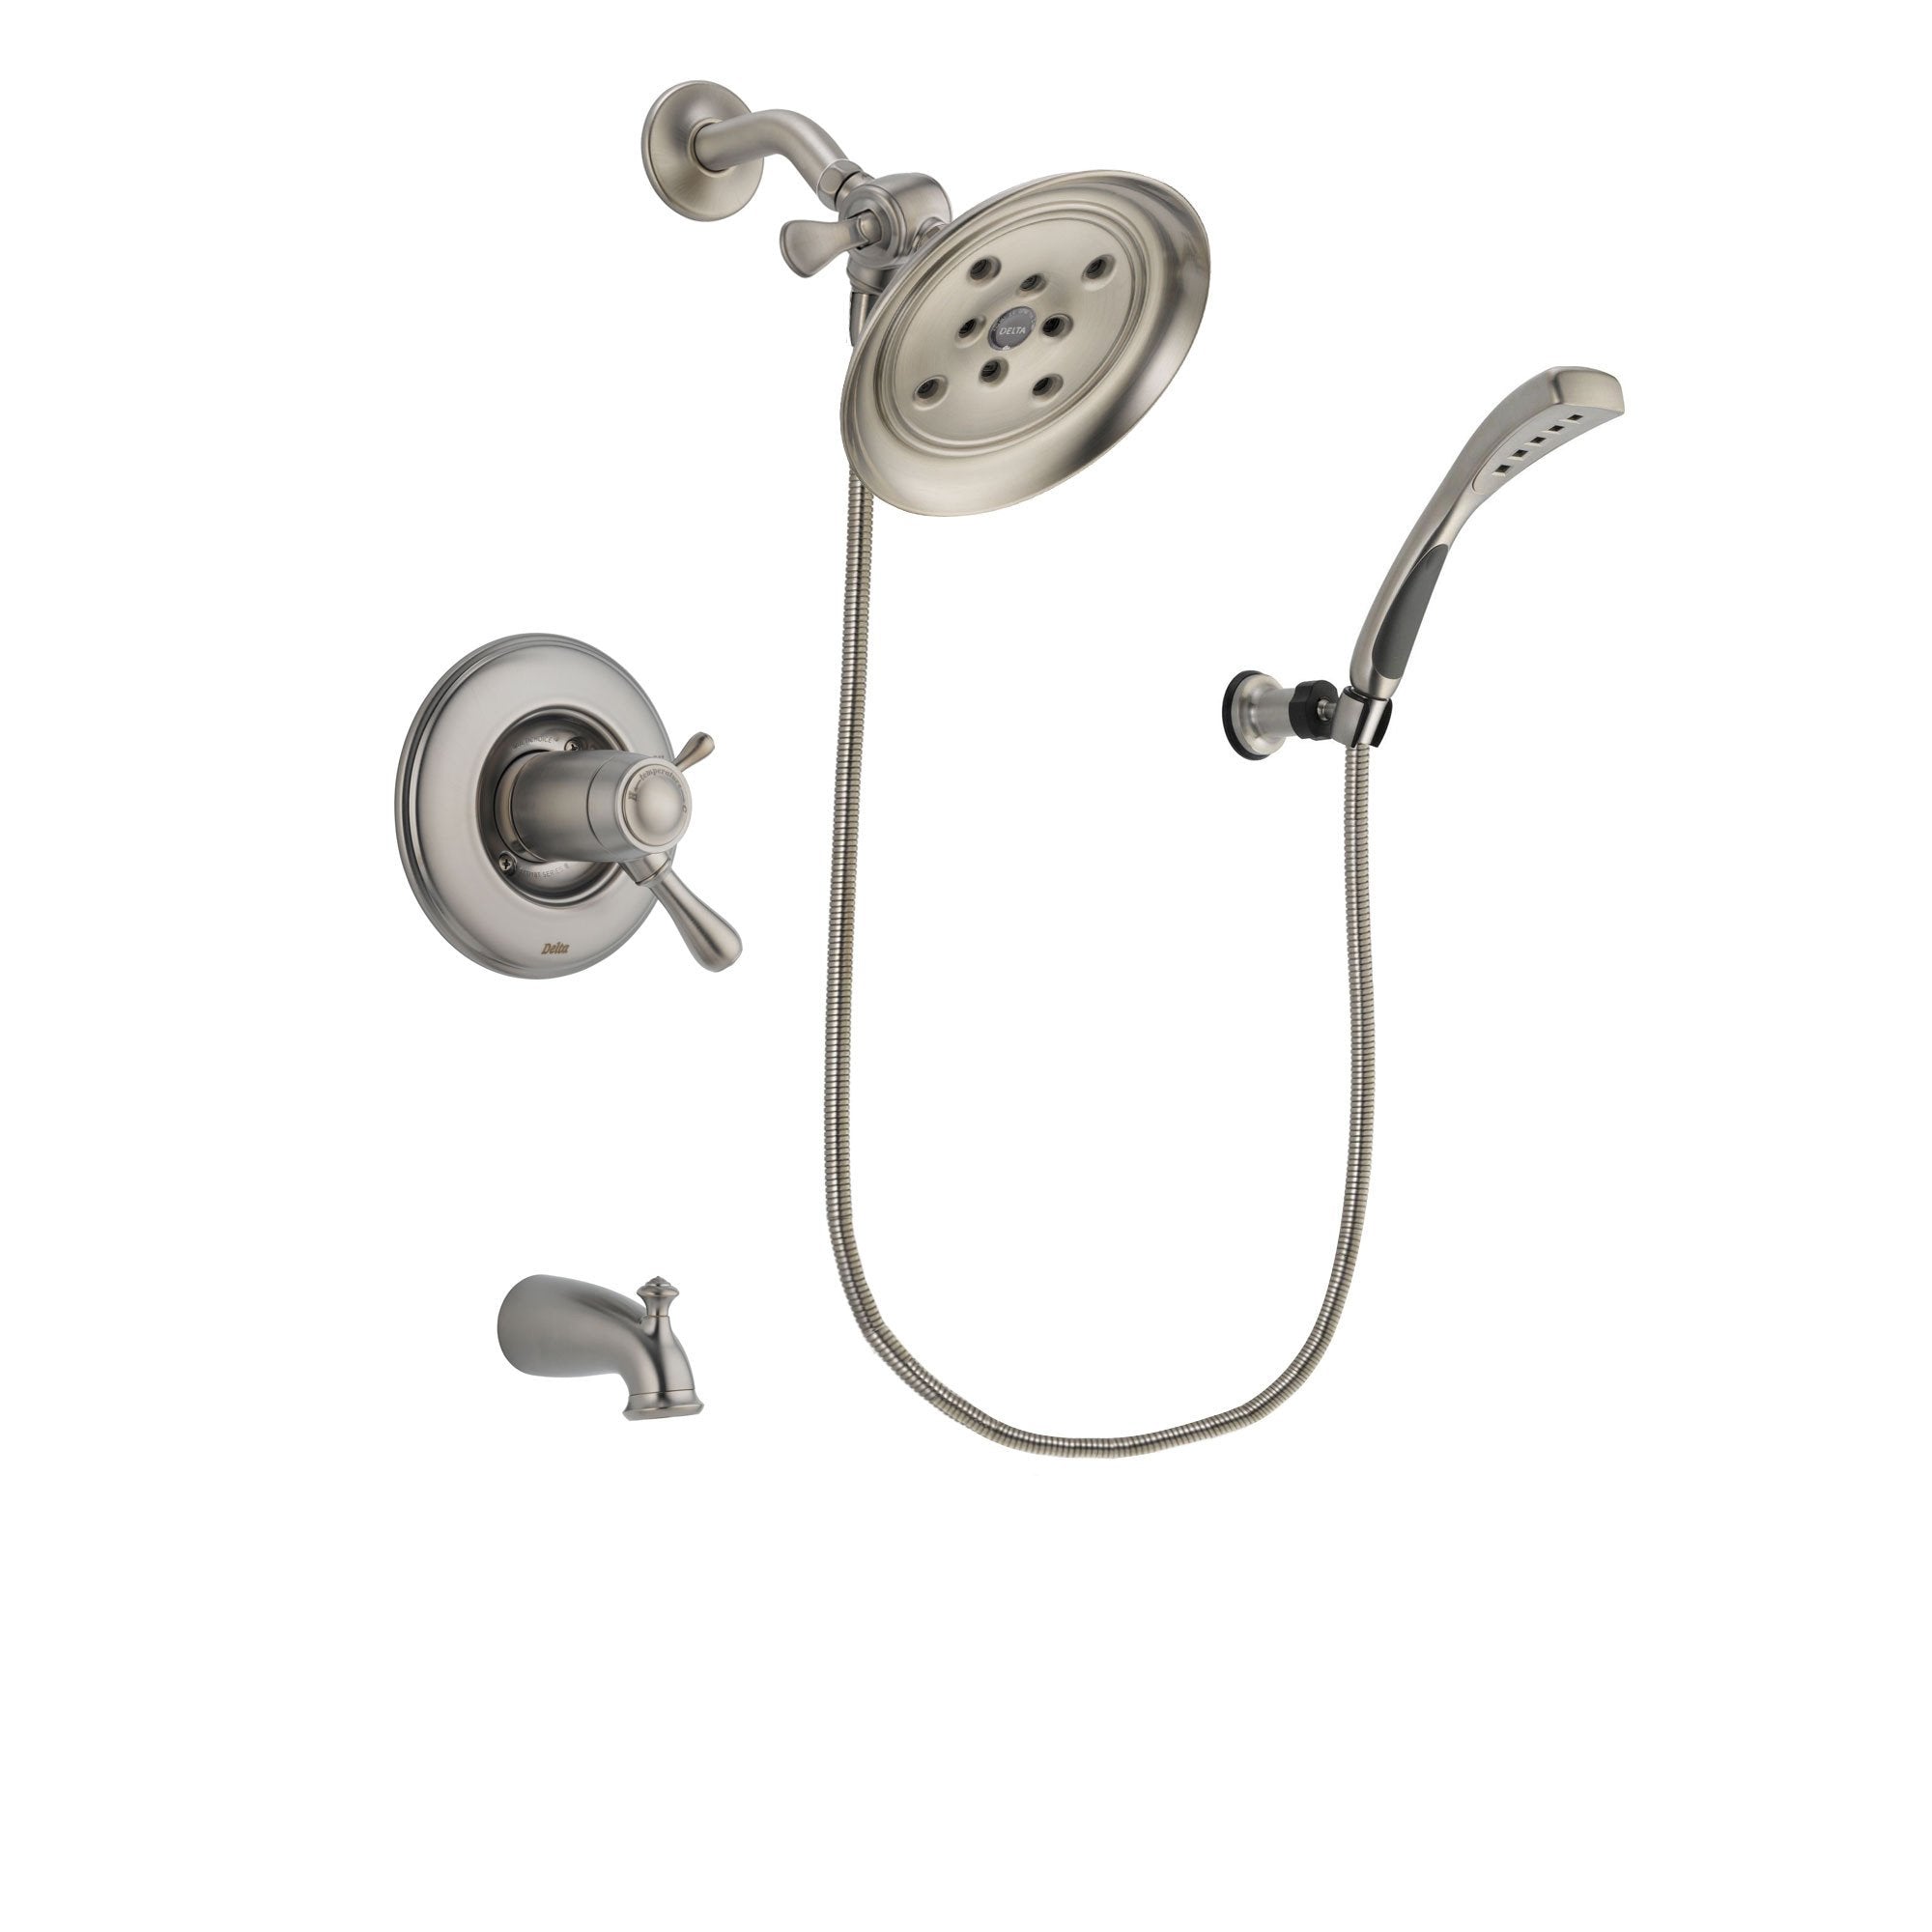 Delta Leland Stainless Steel Finish Thermostatic Tub and Shower Faucet System Package with Large Rain Showerhead and Wall Mounted Handshower Includes Rough-in Valve and Tub Spout DSP1857V